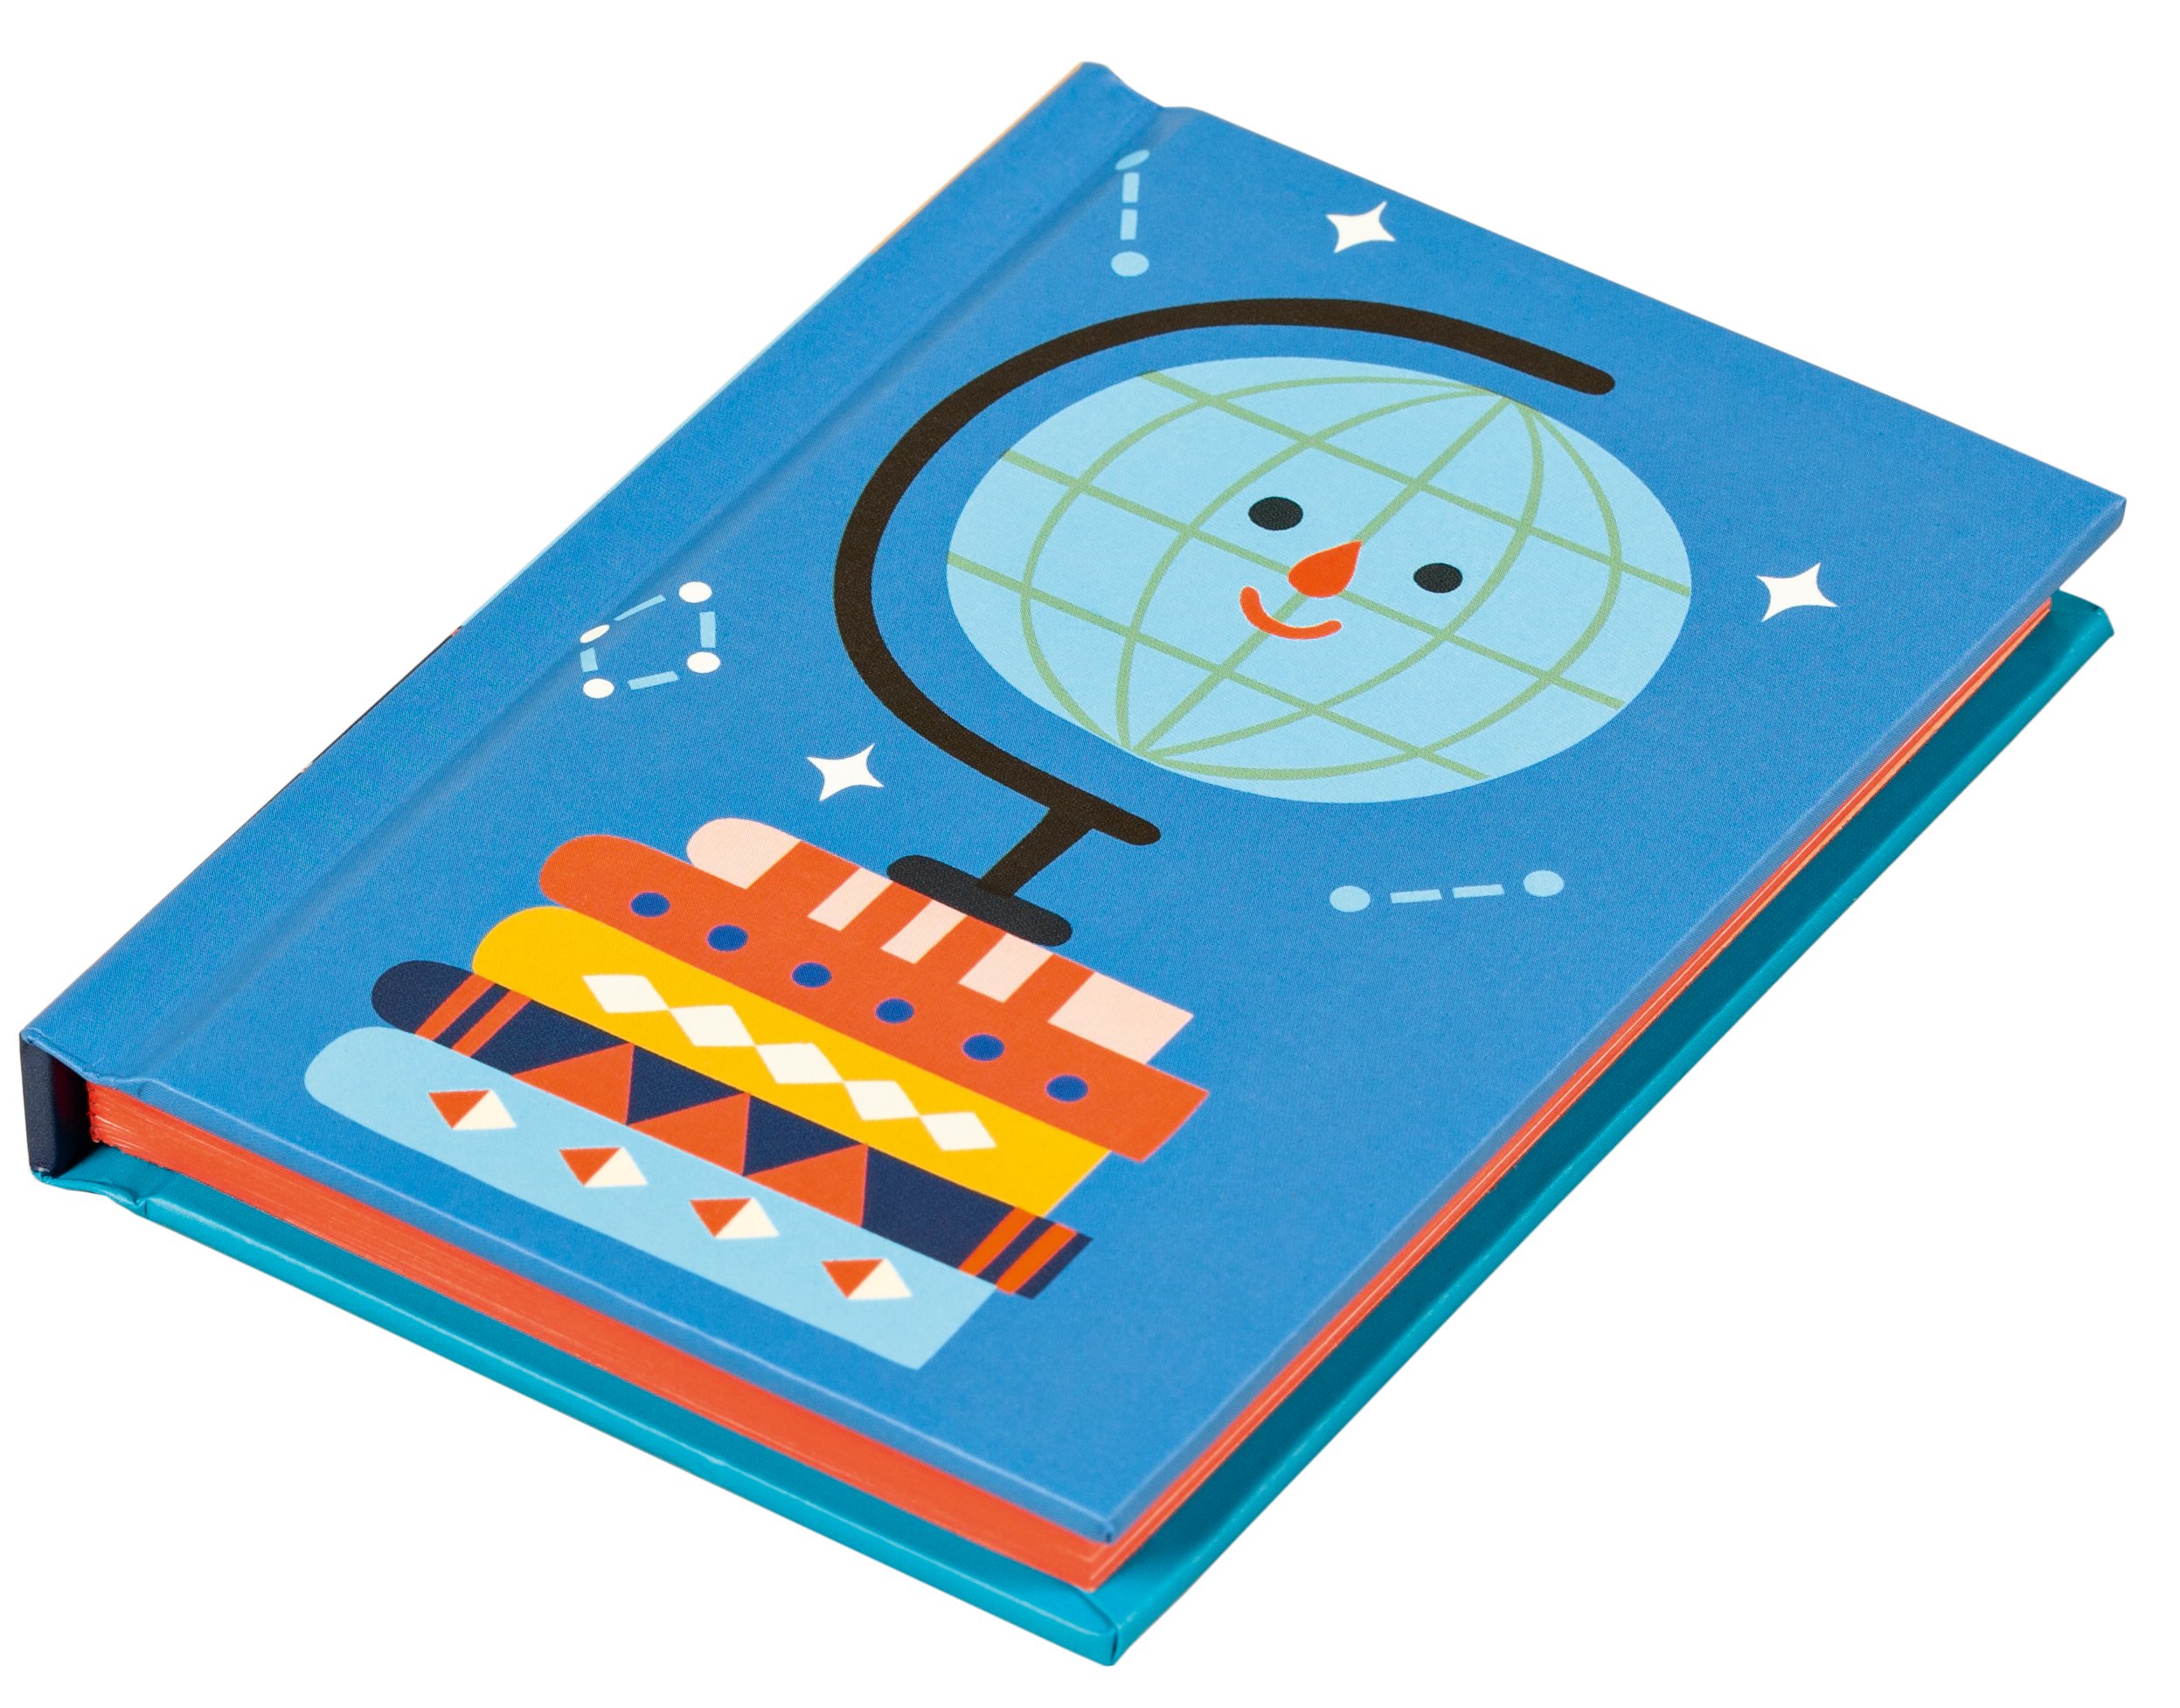 Hsinping Pan's blue globe with smiley face on notebook, by teNeues stationery.